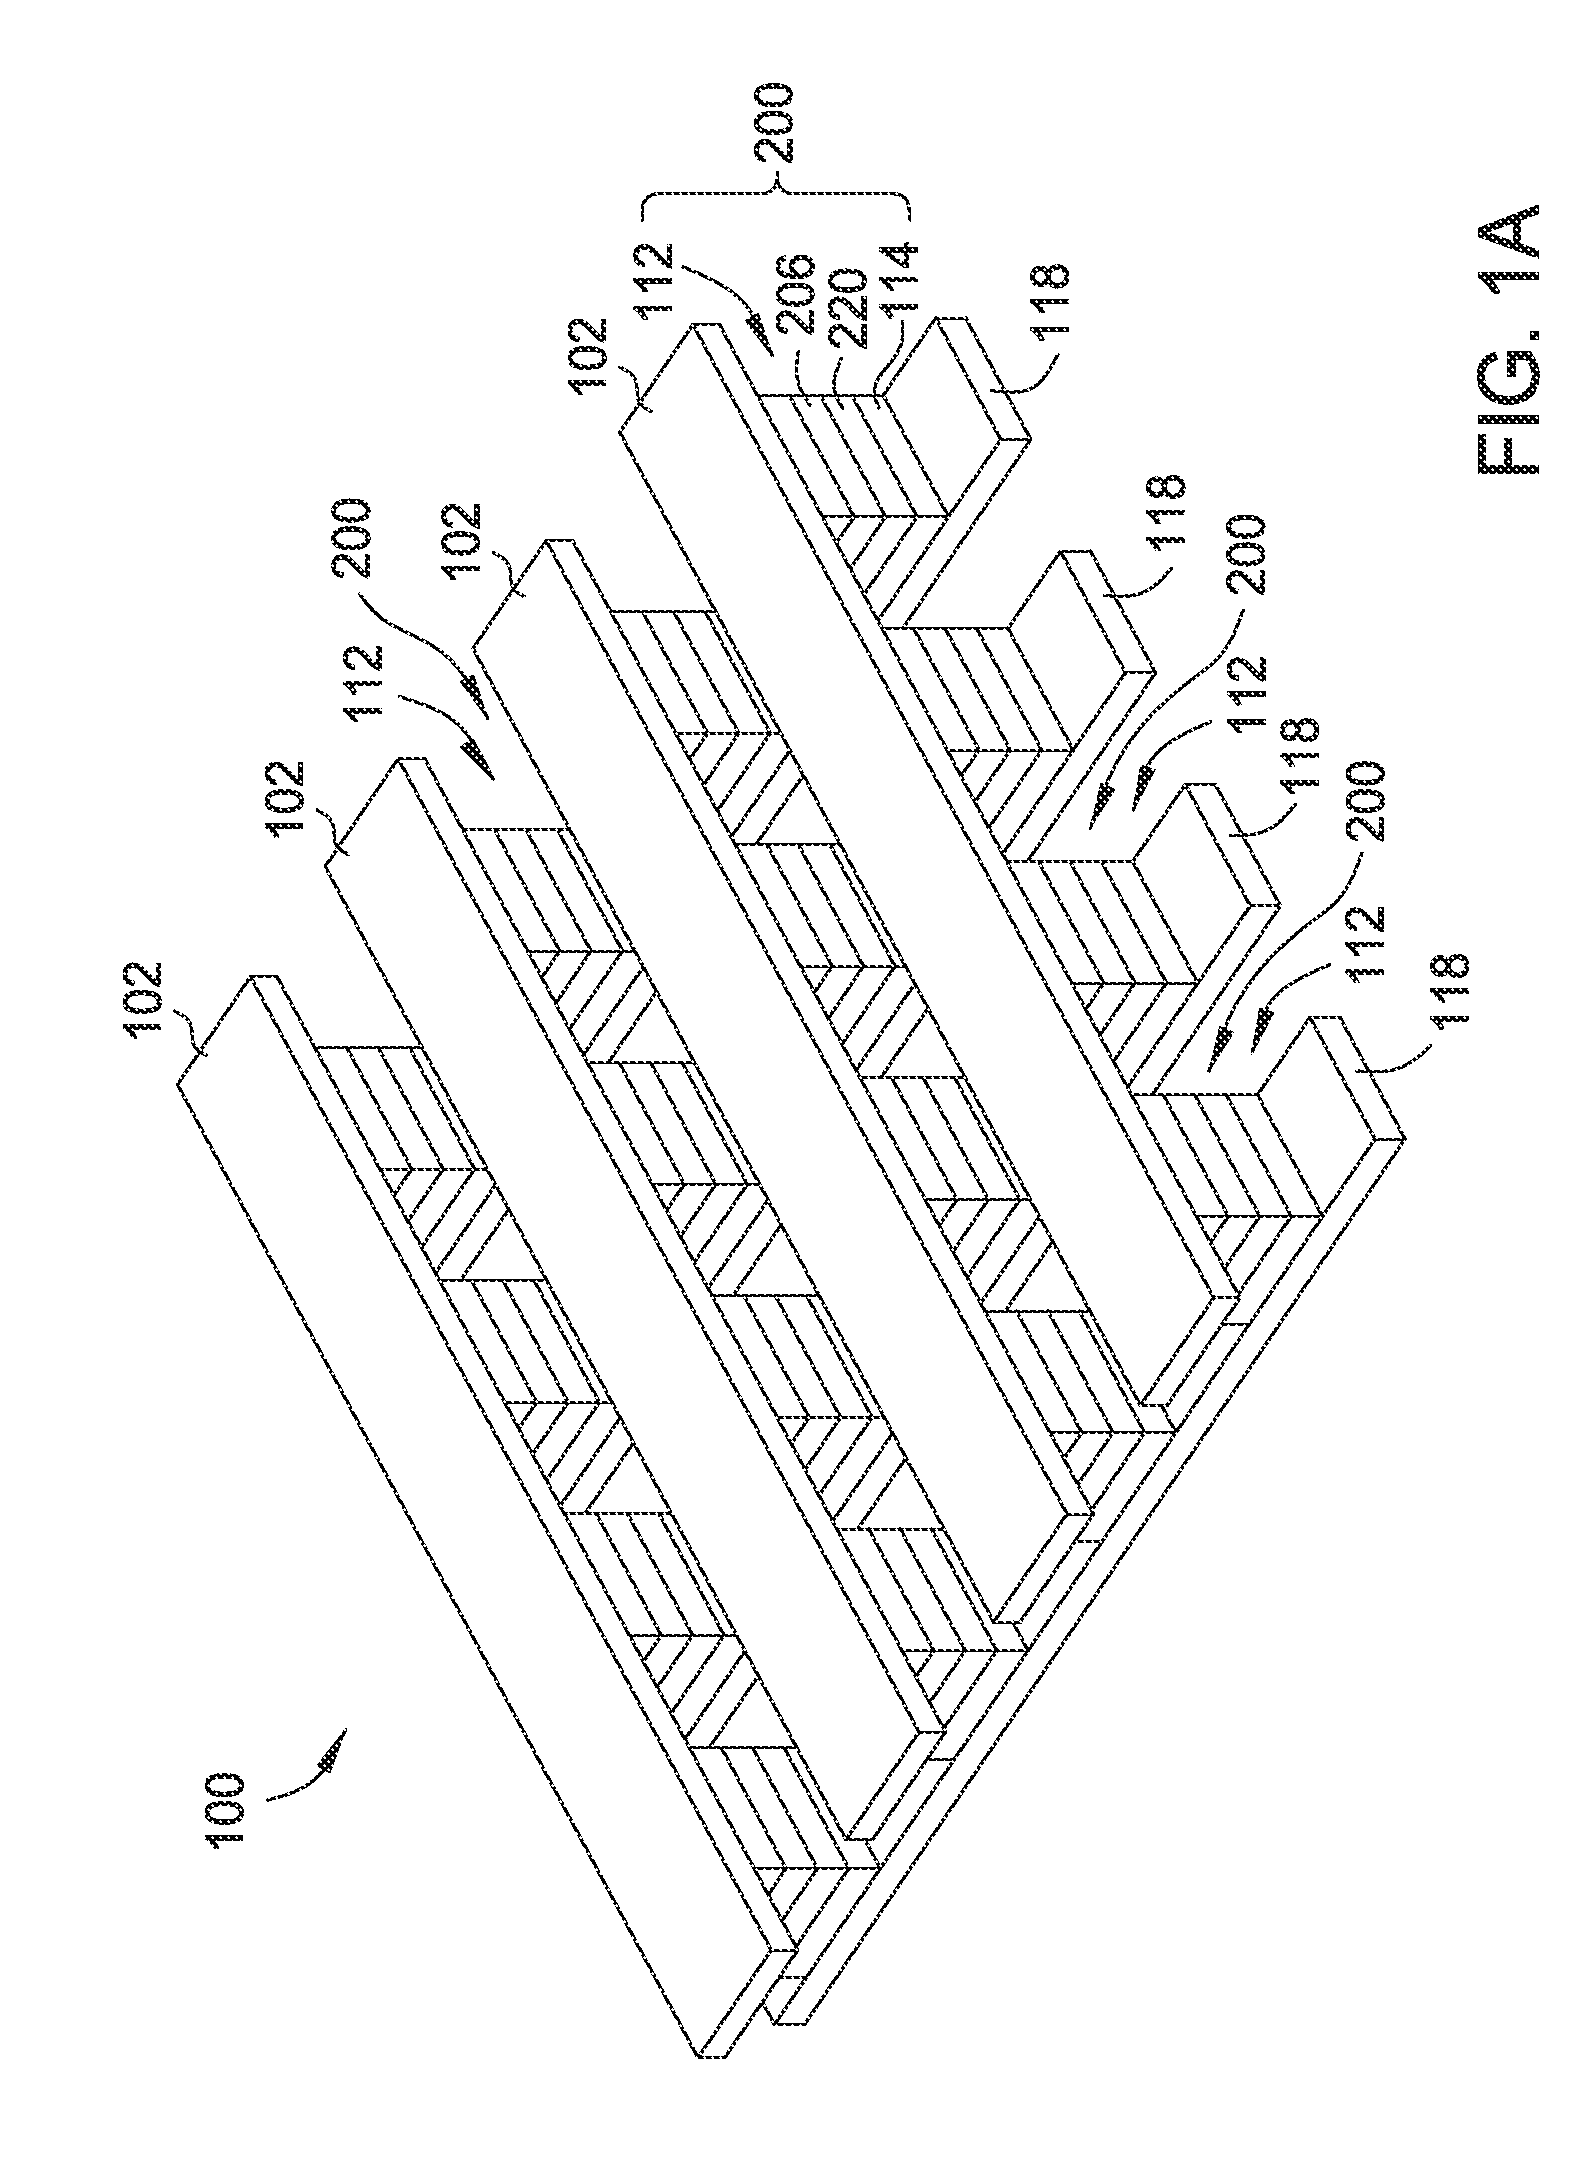 Memory Device Having An Integrated Two-Terminal Current Limiting Resistor